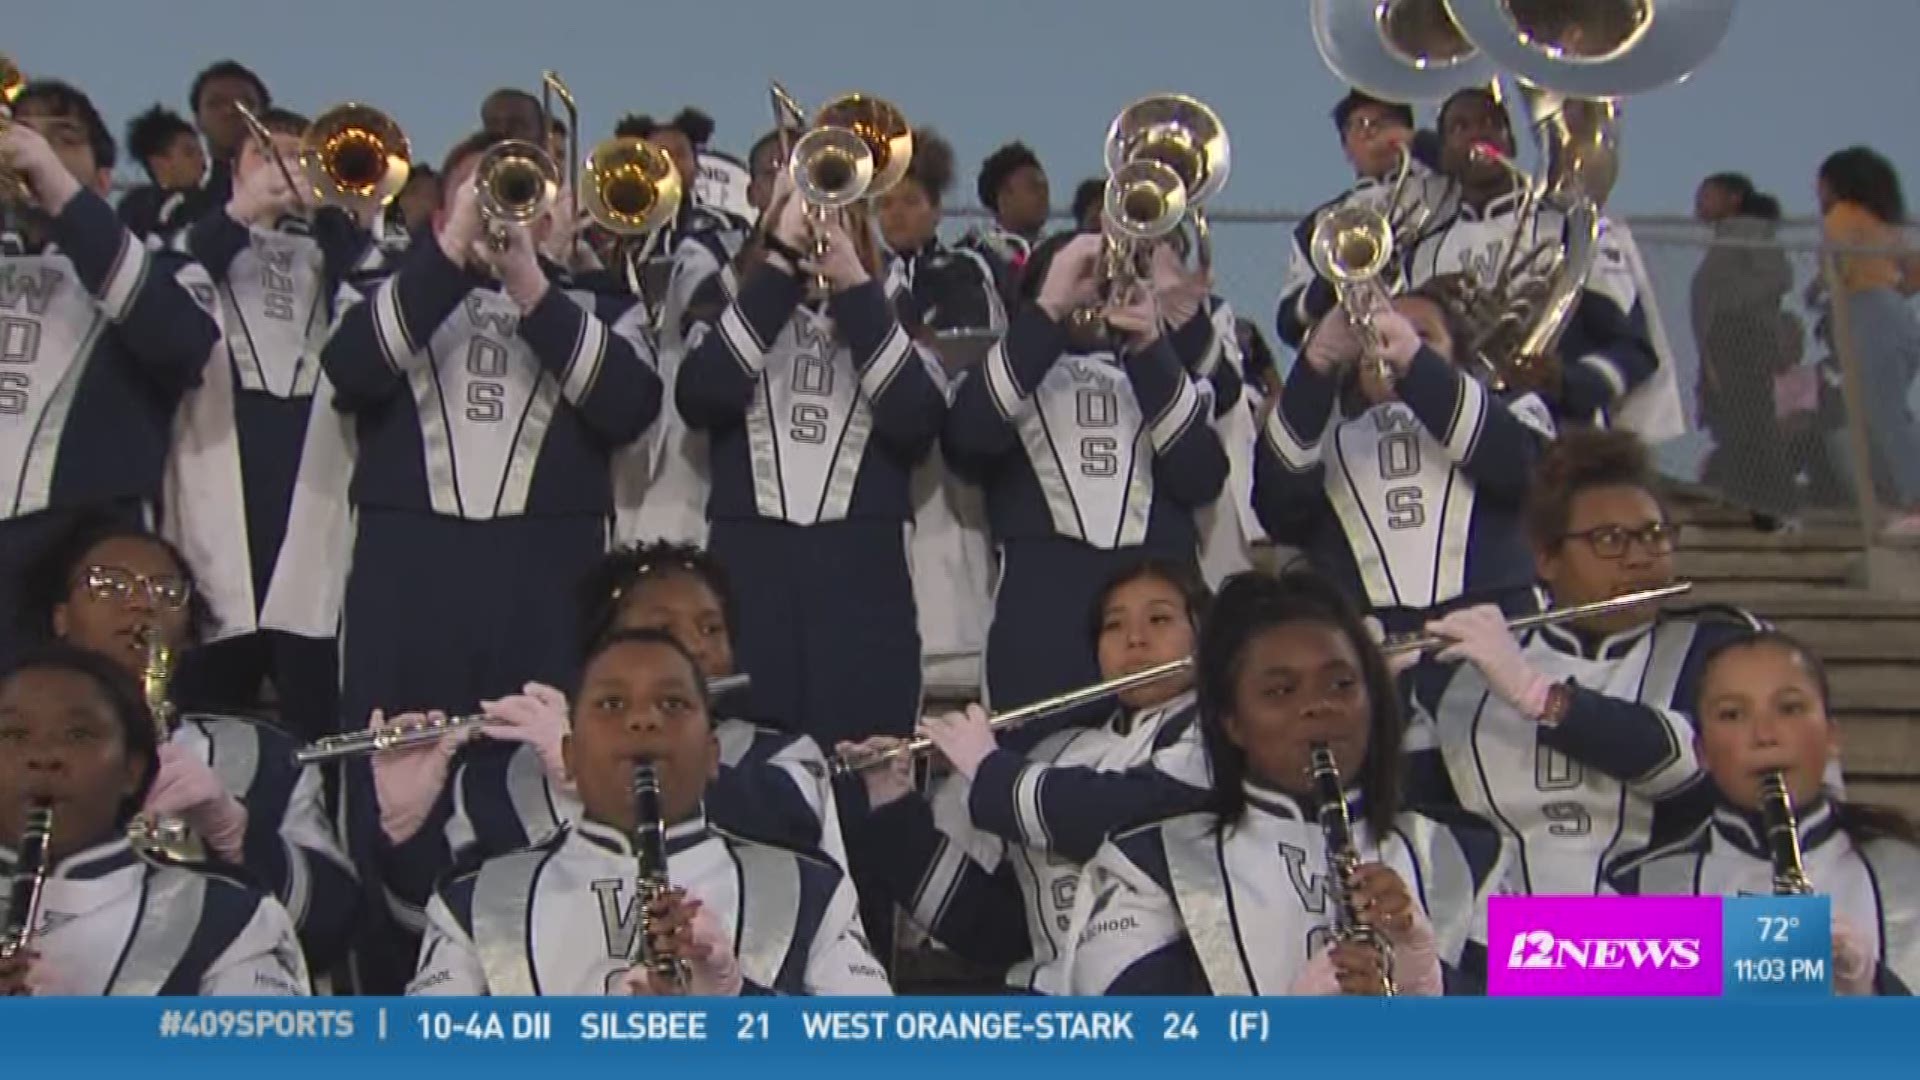 WEEK 7: One more look at the week 7 Band of the Week with the West Orange-Stark M3 band